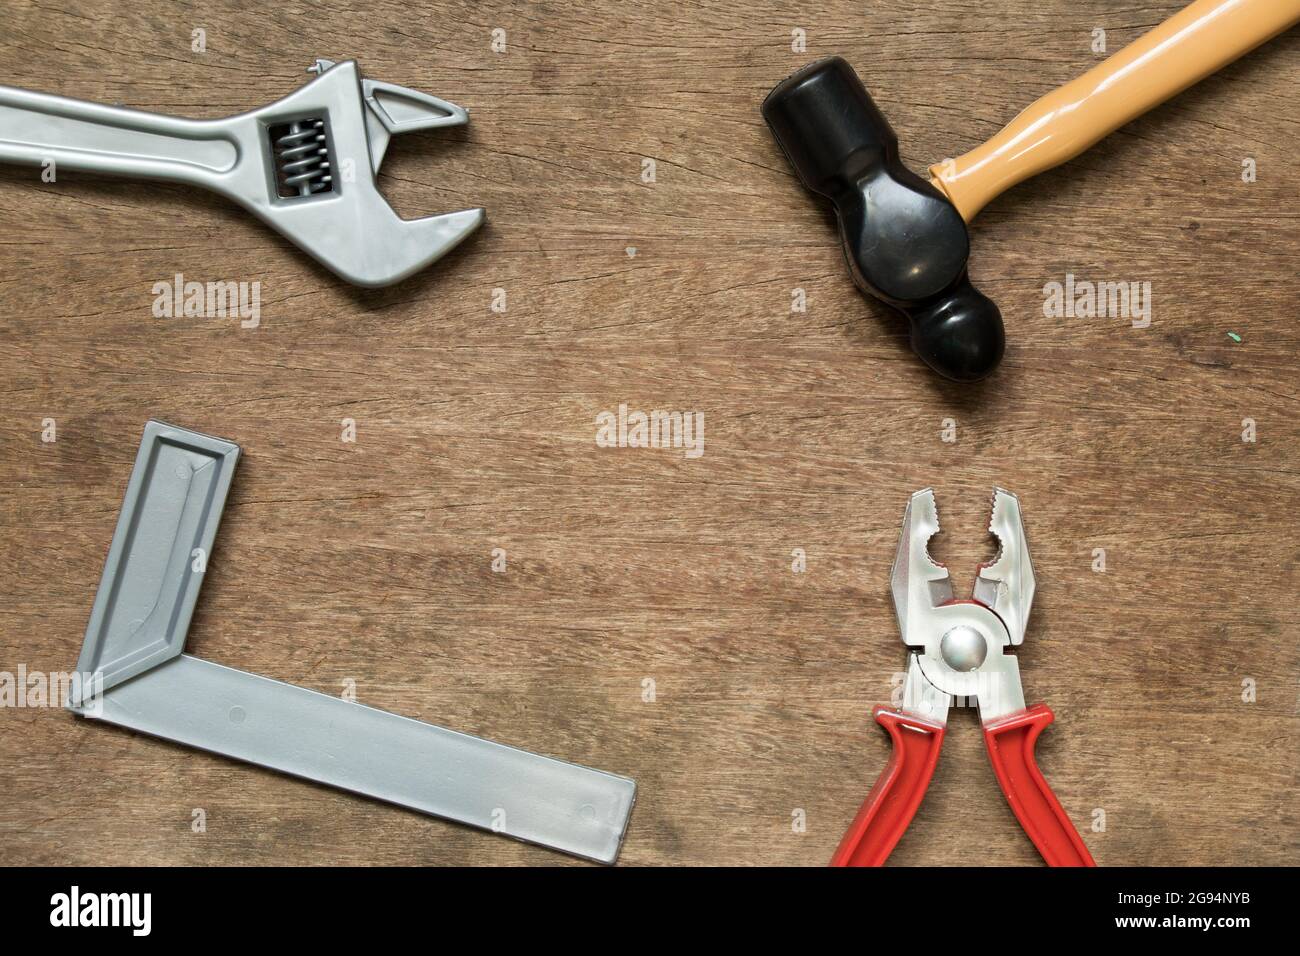 Toy equipment tool (hammer, mschinist square, wrench, pliers) with copy space on wood background Stock Photo